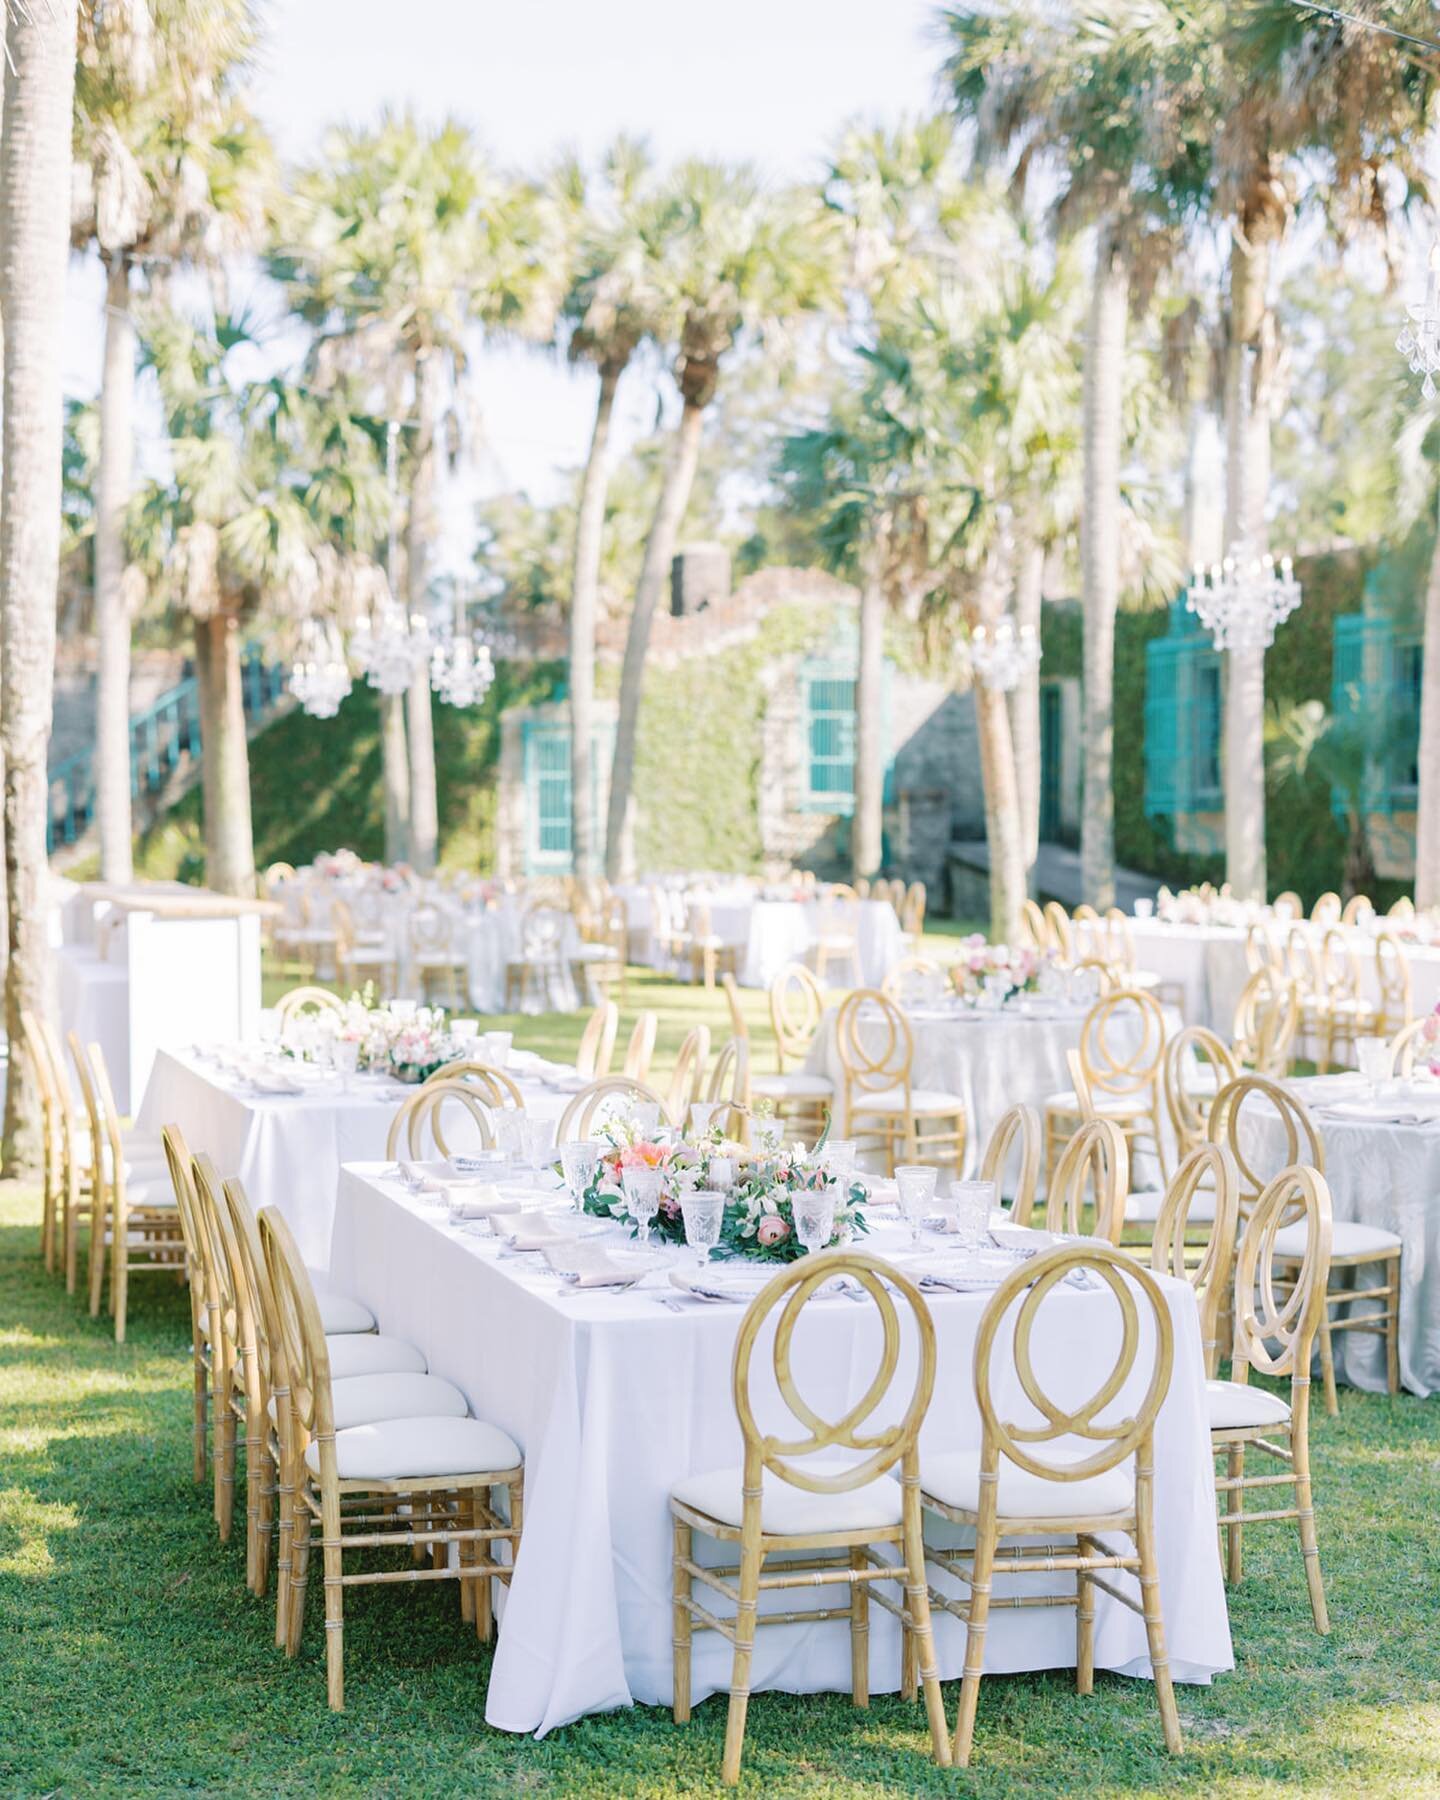 A beautiful sunny reception, in an old castle, surrounds by palms&hellip;YES PLEASE 🌴🌴🌴

📸: @jeffandmollyphotography 
Planning &amp; Design: @steelemagnoliaevents 
White Birch Pieces:
&lsquo;Eden&rsquo; Chairs
&lsquo;Eden&rsquo; Bars